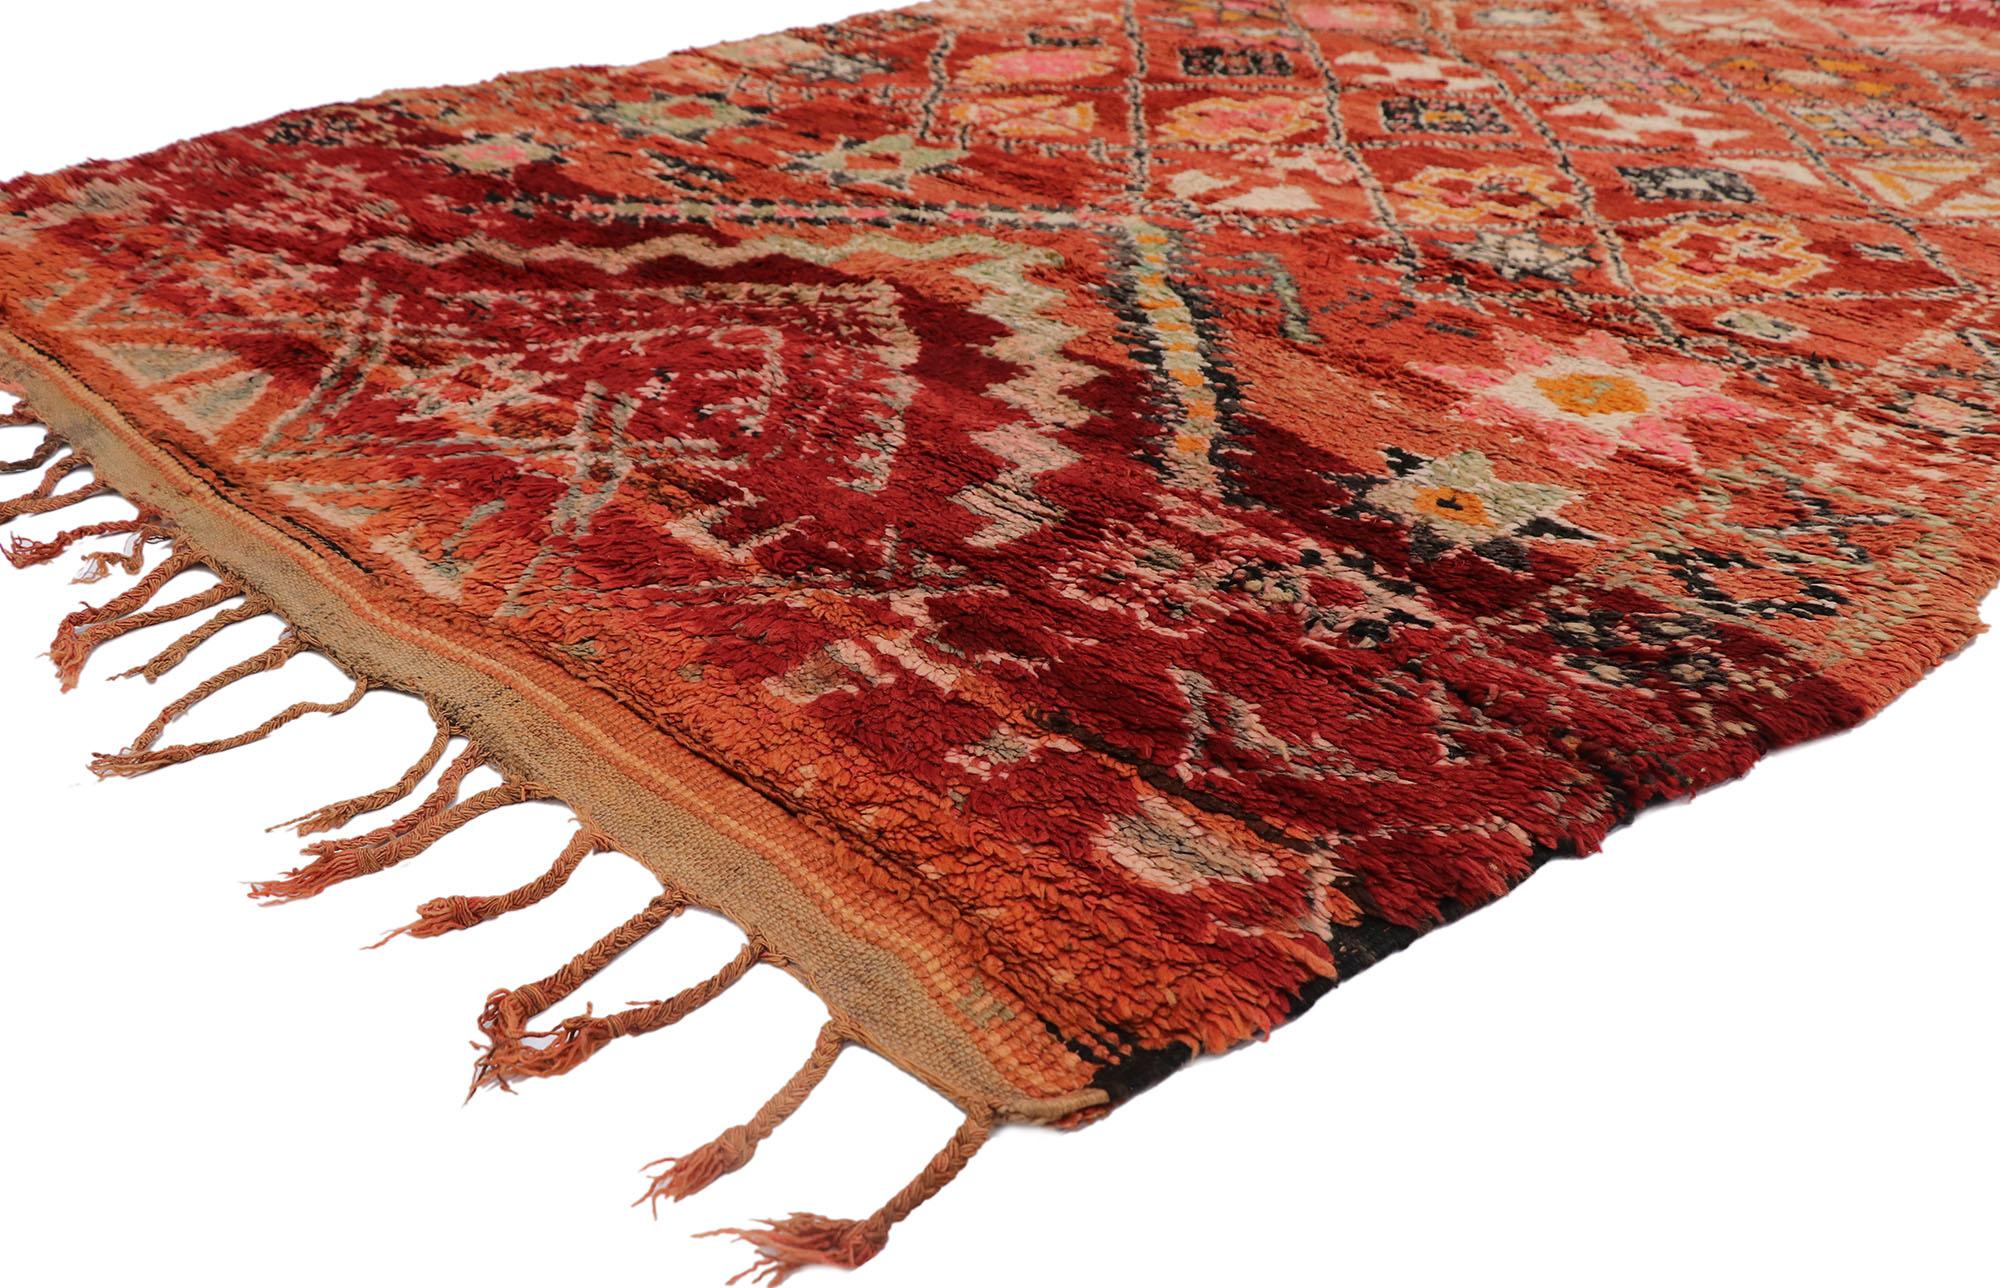 21311 Vintage Red Boujad Moroccan Rug, 05'11 x 09'02. Boujad rugs, born in the embrace of the Middle Atlas Mountains, emerge as traditional handwoven Moroccan treasures woven by the skilled hands of indigenous Berber artisans. Adored for their